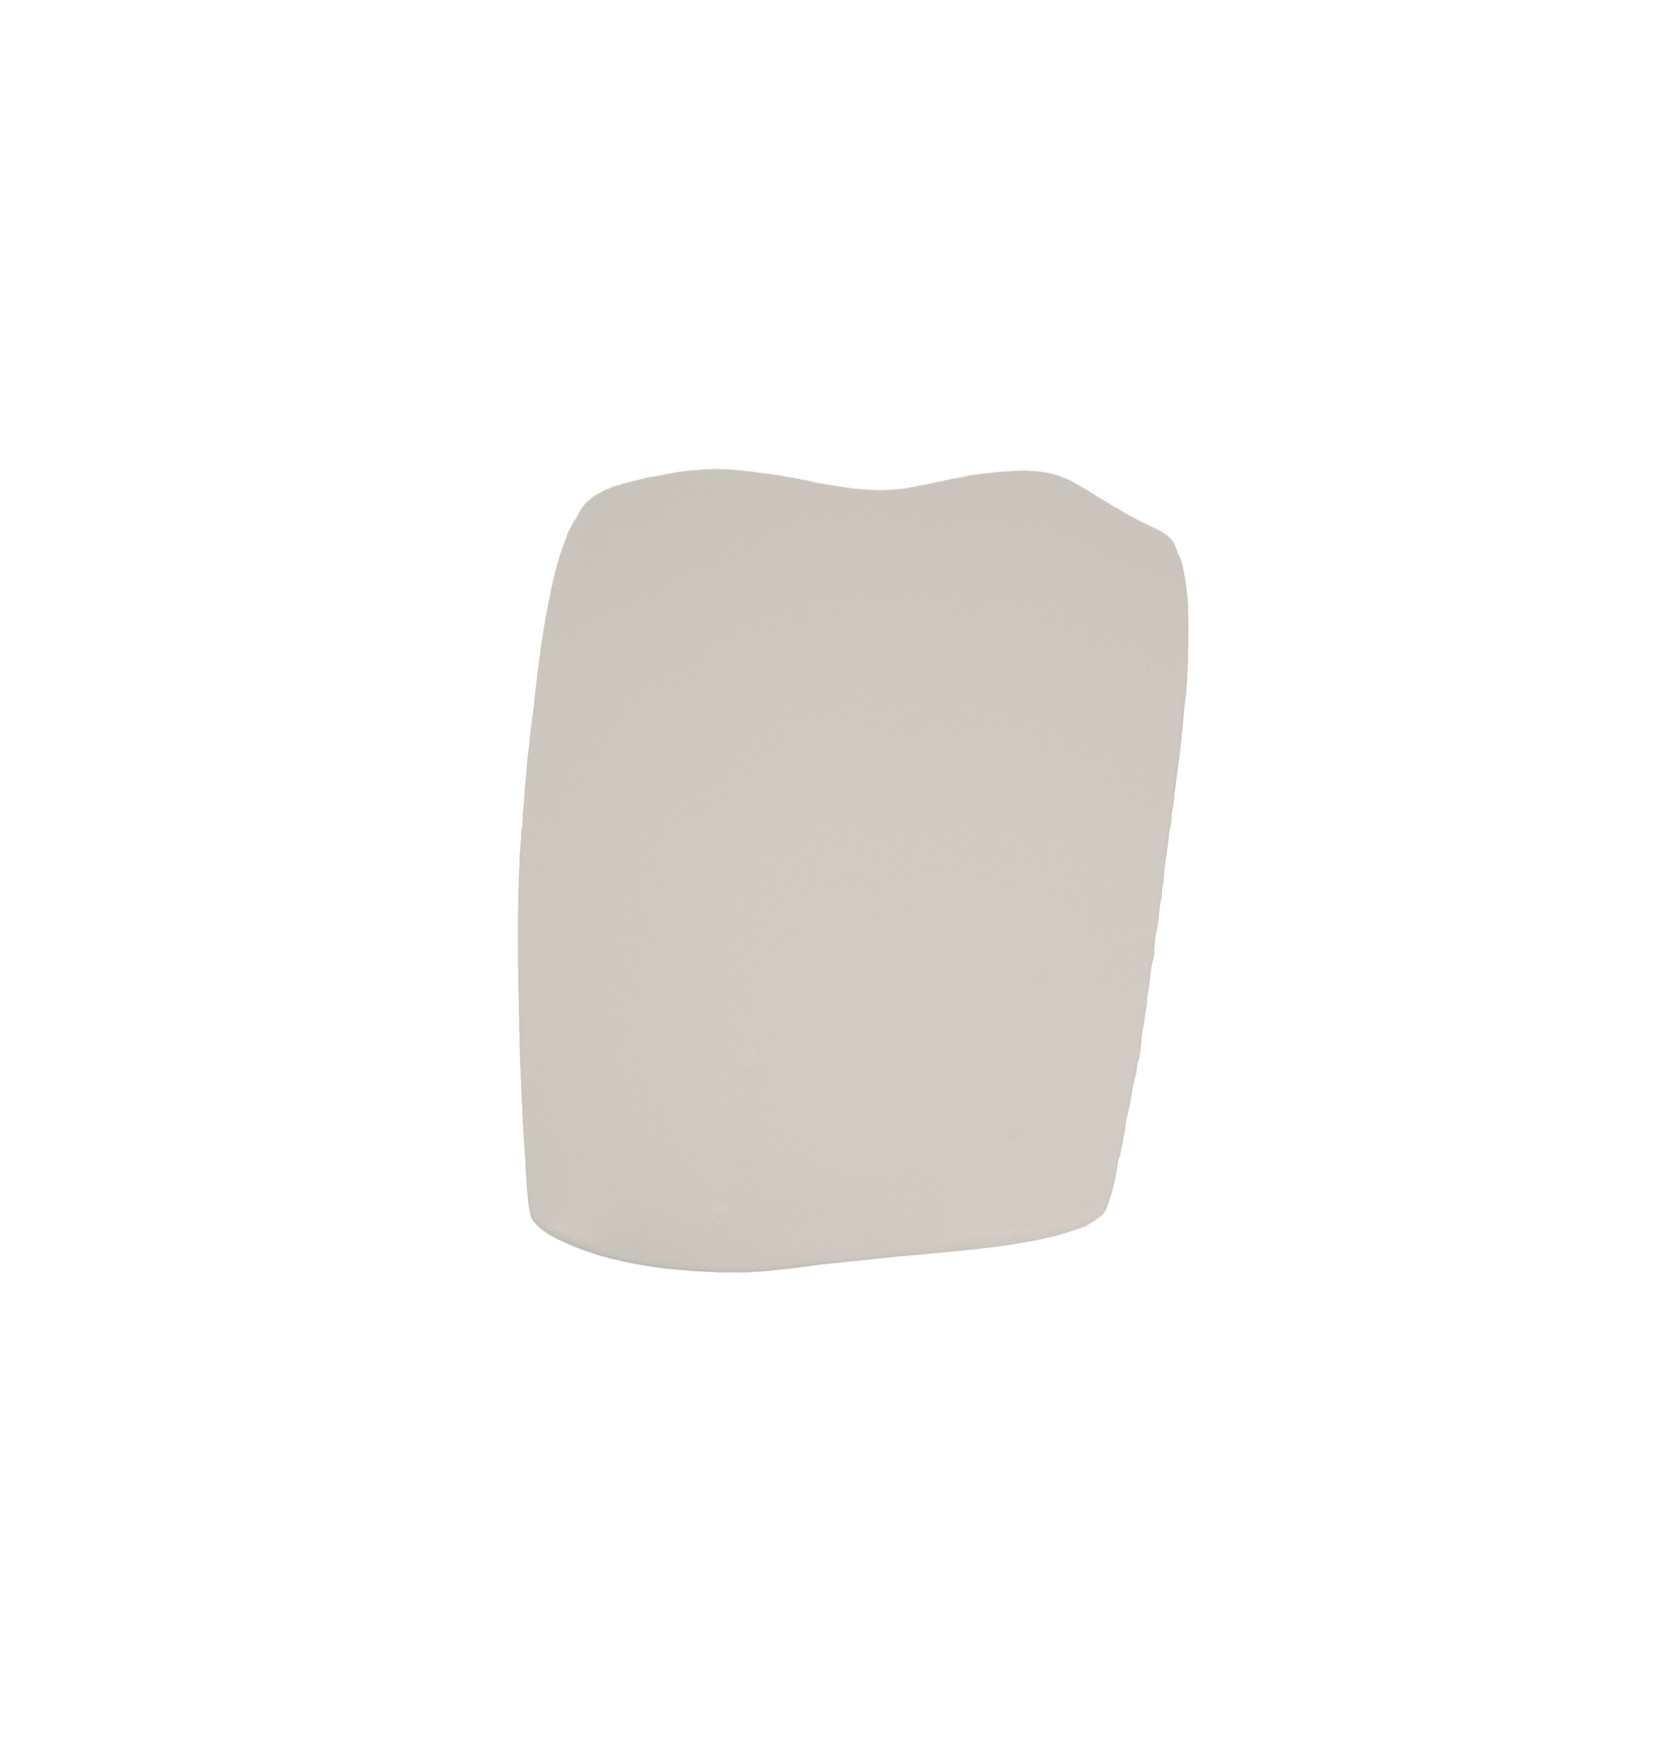 Clare Paint - Beigeing - Wall Swatch - Image 1